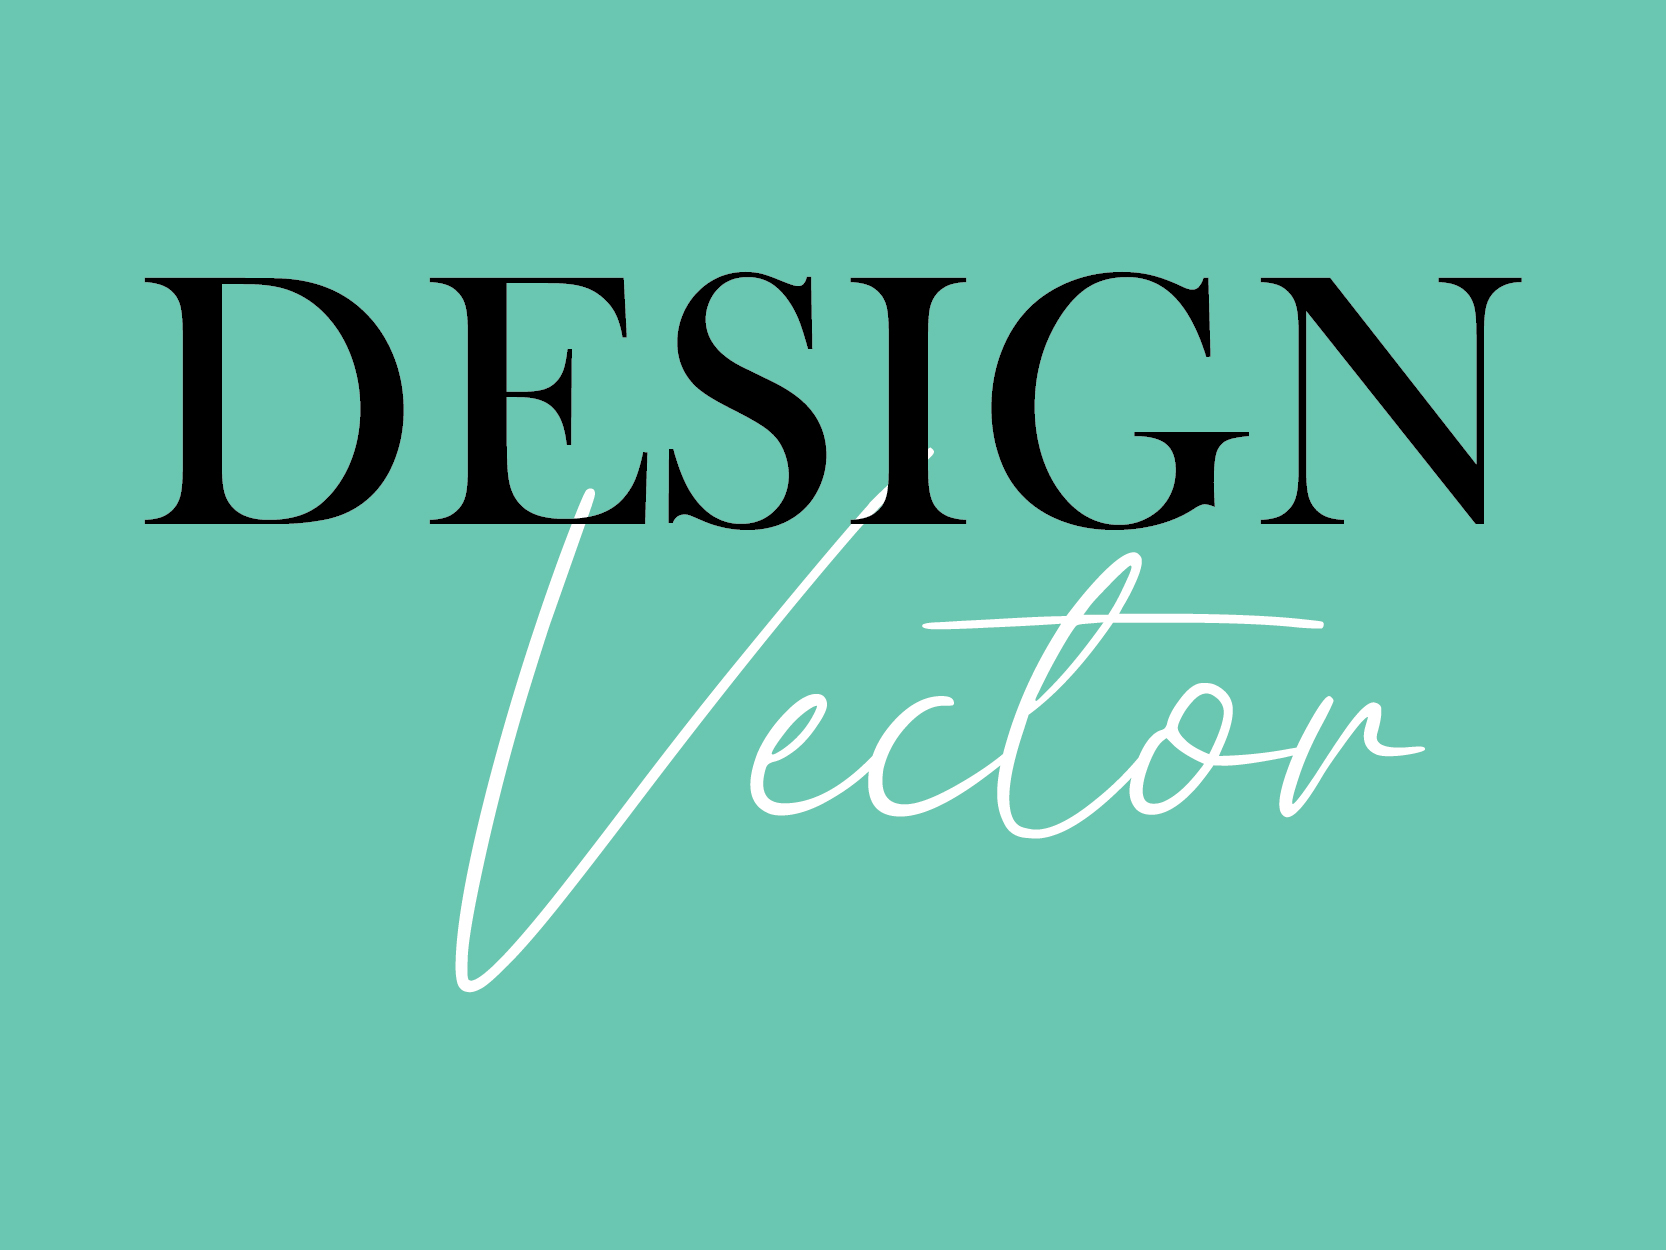 Cover of Design Vector.